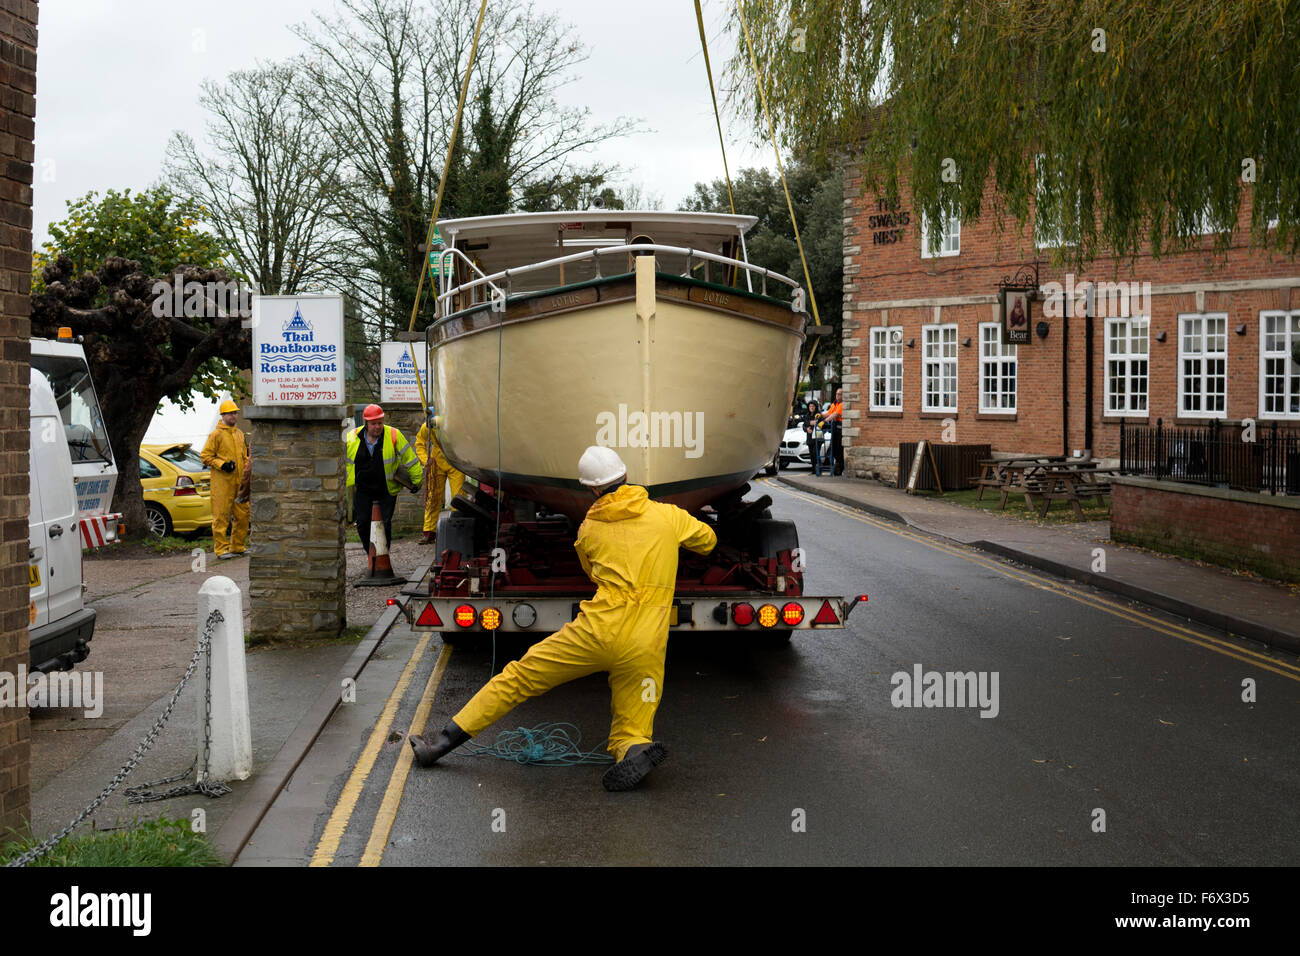 A tourist trip boat 'Titan' being loaded onto a low-loader to go for winter maintenance, Stratford-upon-Avon, UK Stock Photo